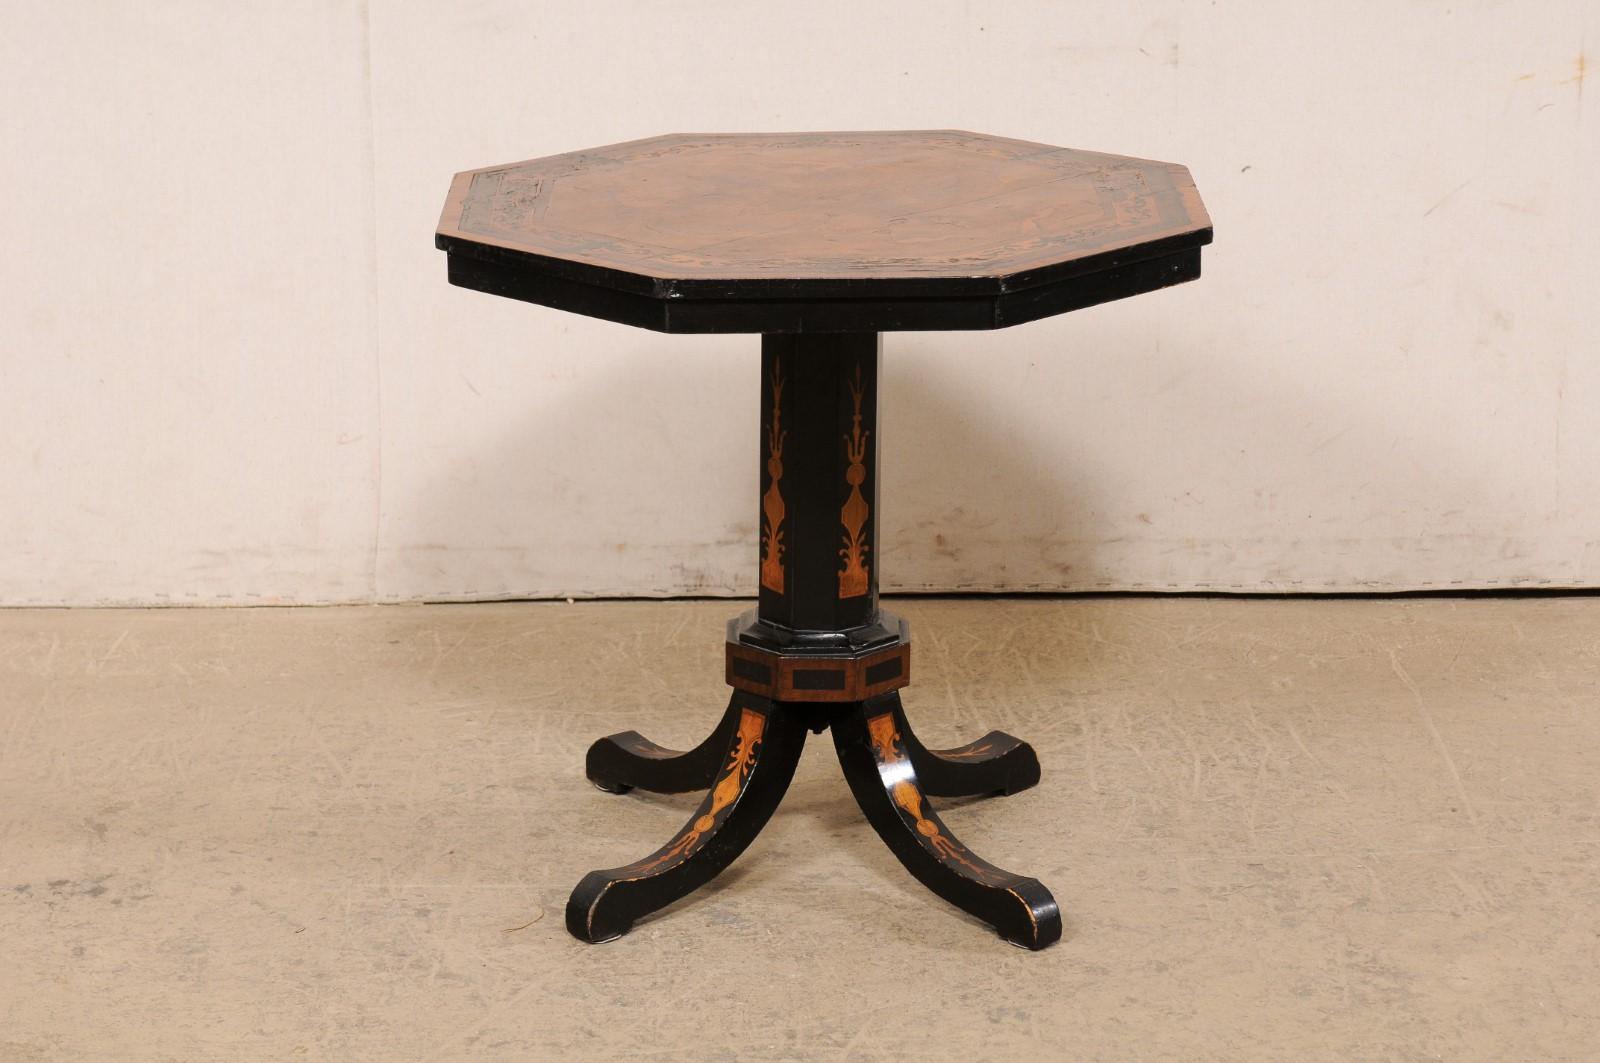 19th Century Octagonal Pedestal Table with Wonderful Inlay Embellishments 6